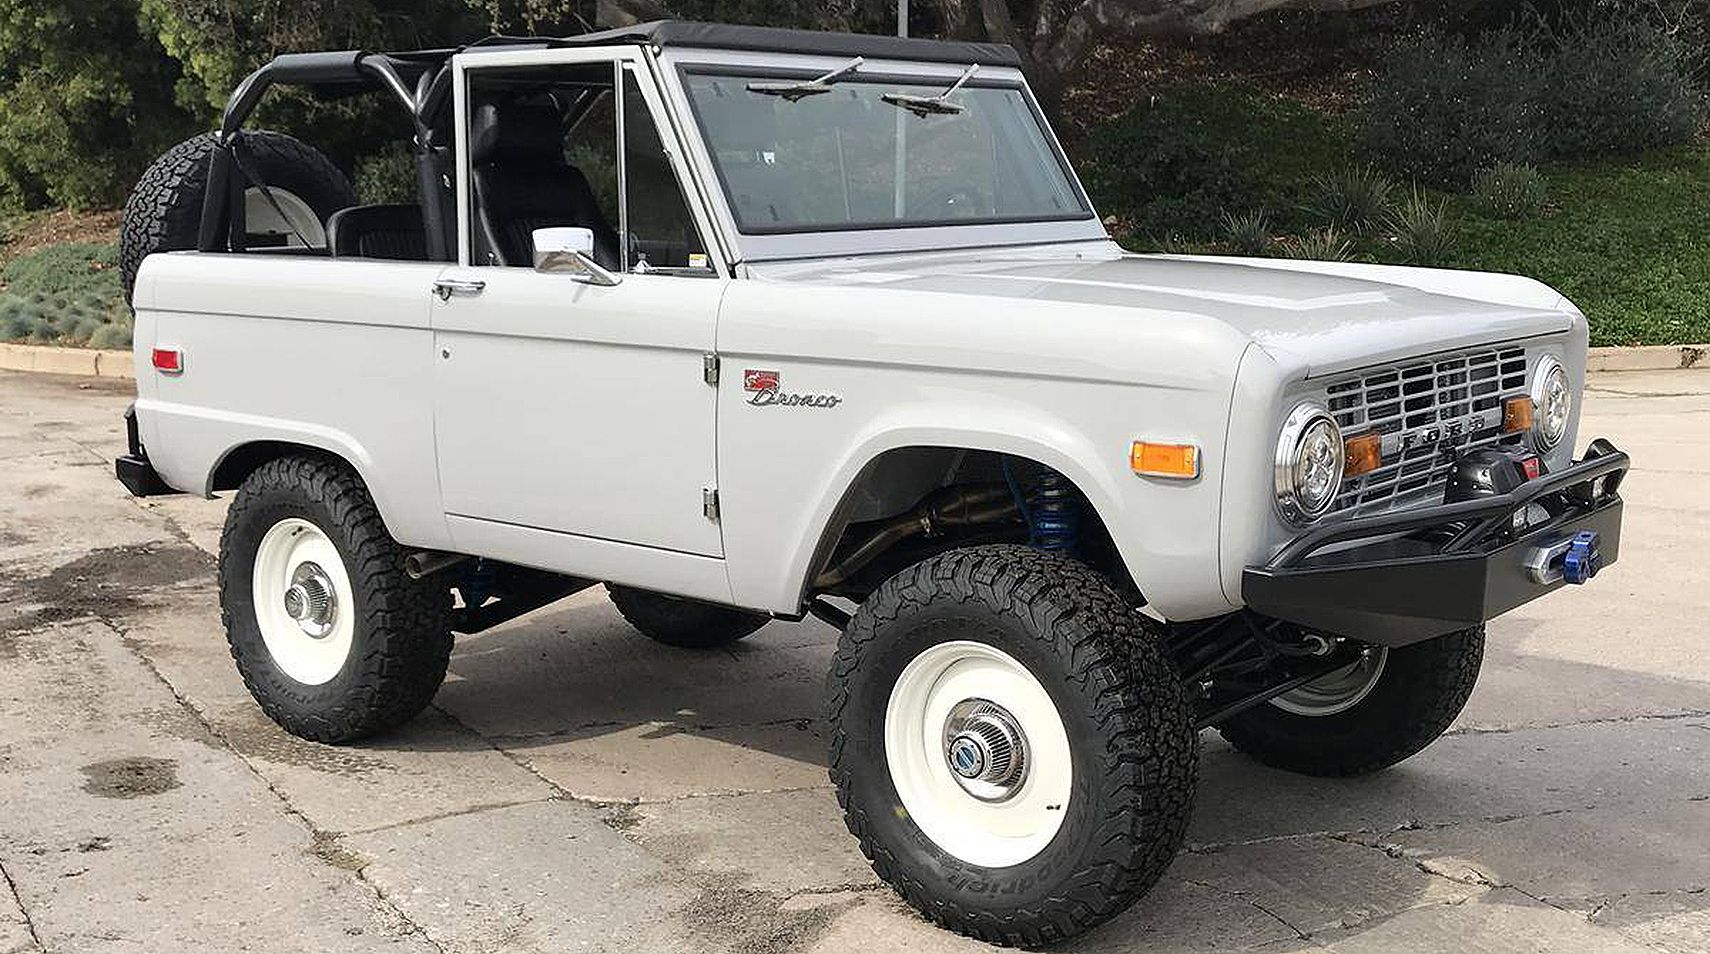 1973 Ford Bronco Coyote Legend: $225,000